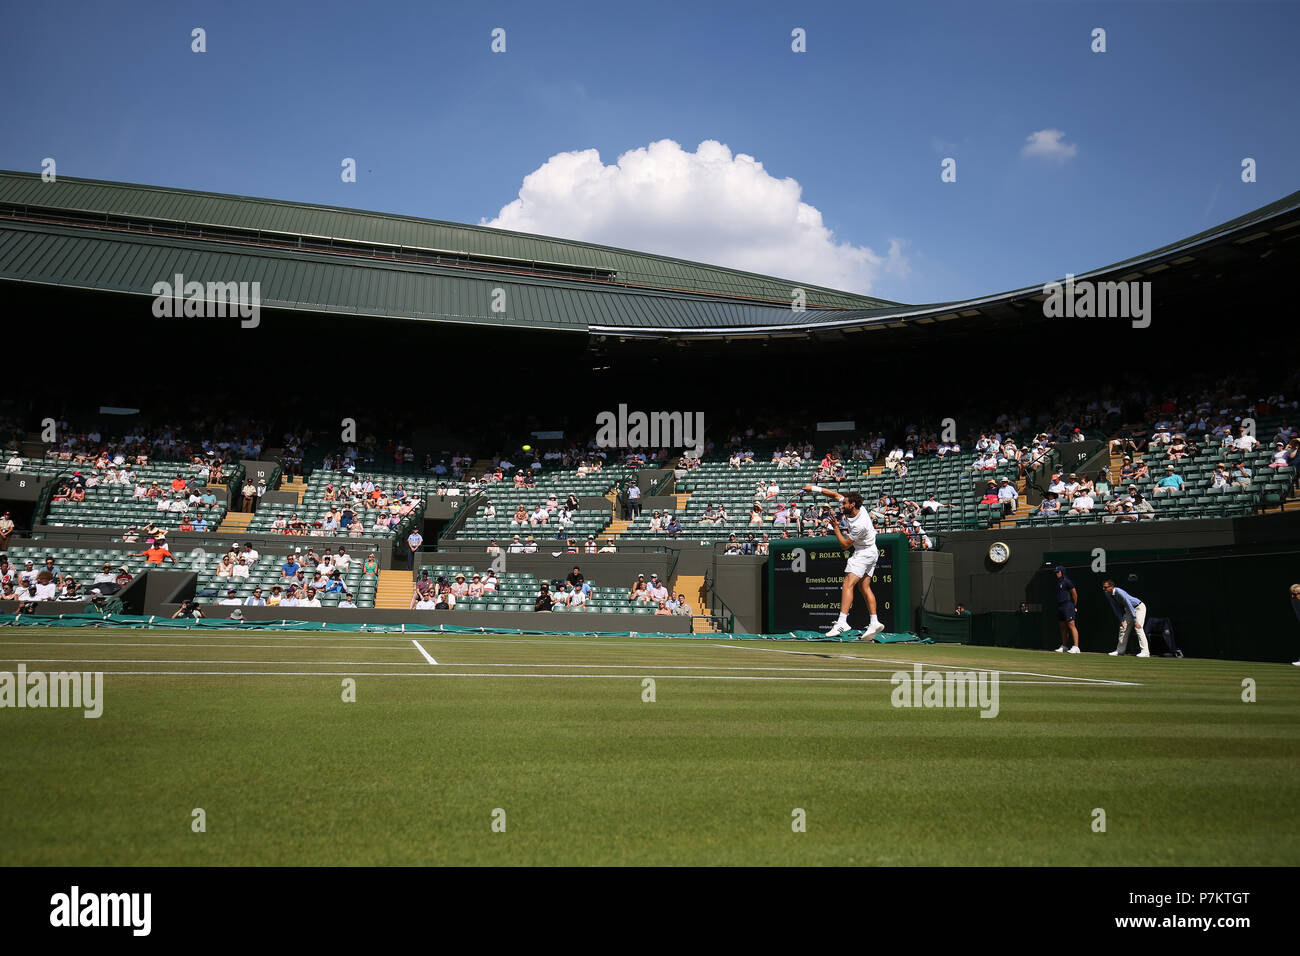 London, UK. 7th July 2018. The Wimbledon Tennis Championships, Day 6; Many empty seats due to the Workd Cup England match as Ernest Gulbis (Lat) plays Alexander Zverev (DEU) Credit: Action Plus Sports Images/Alamy Live News Credit: Action Plus Sports Images/Alamy Live News Credit: Action Plus Sports Images/Alamy Live News Stock Photo